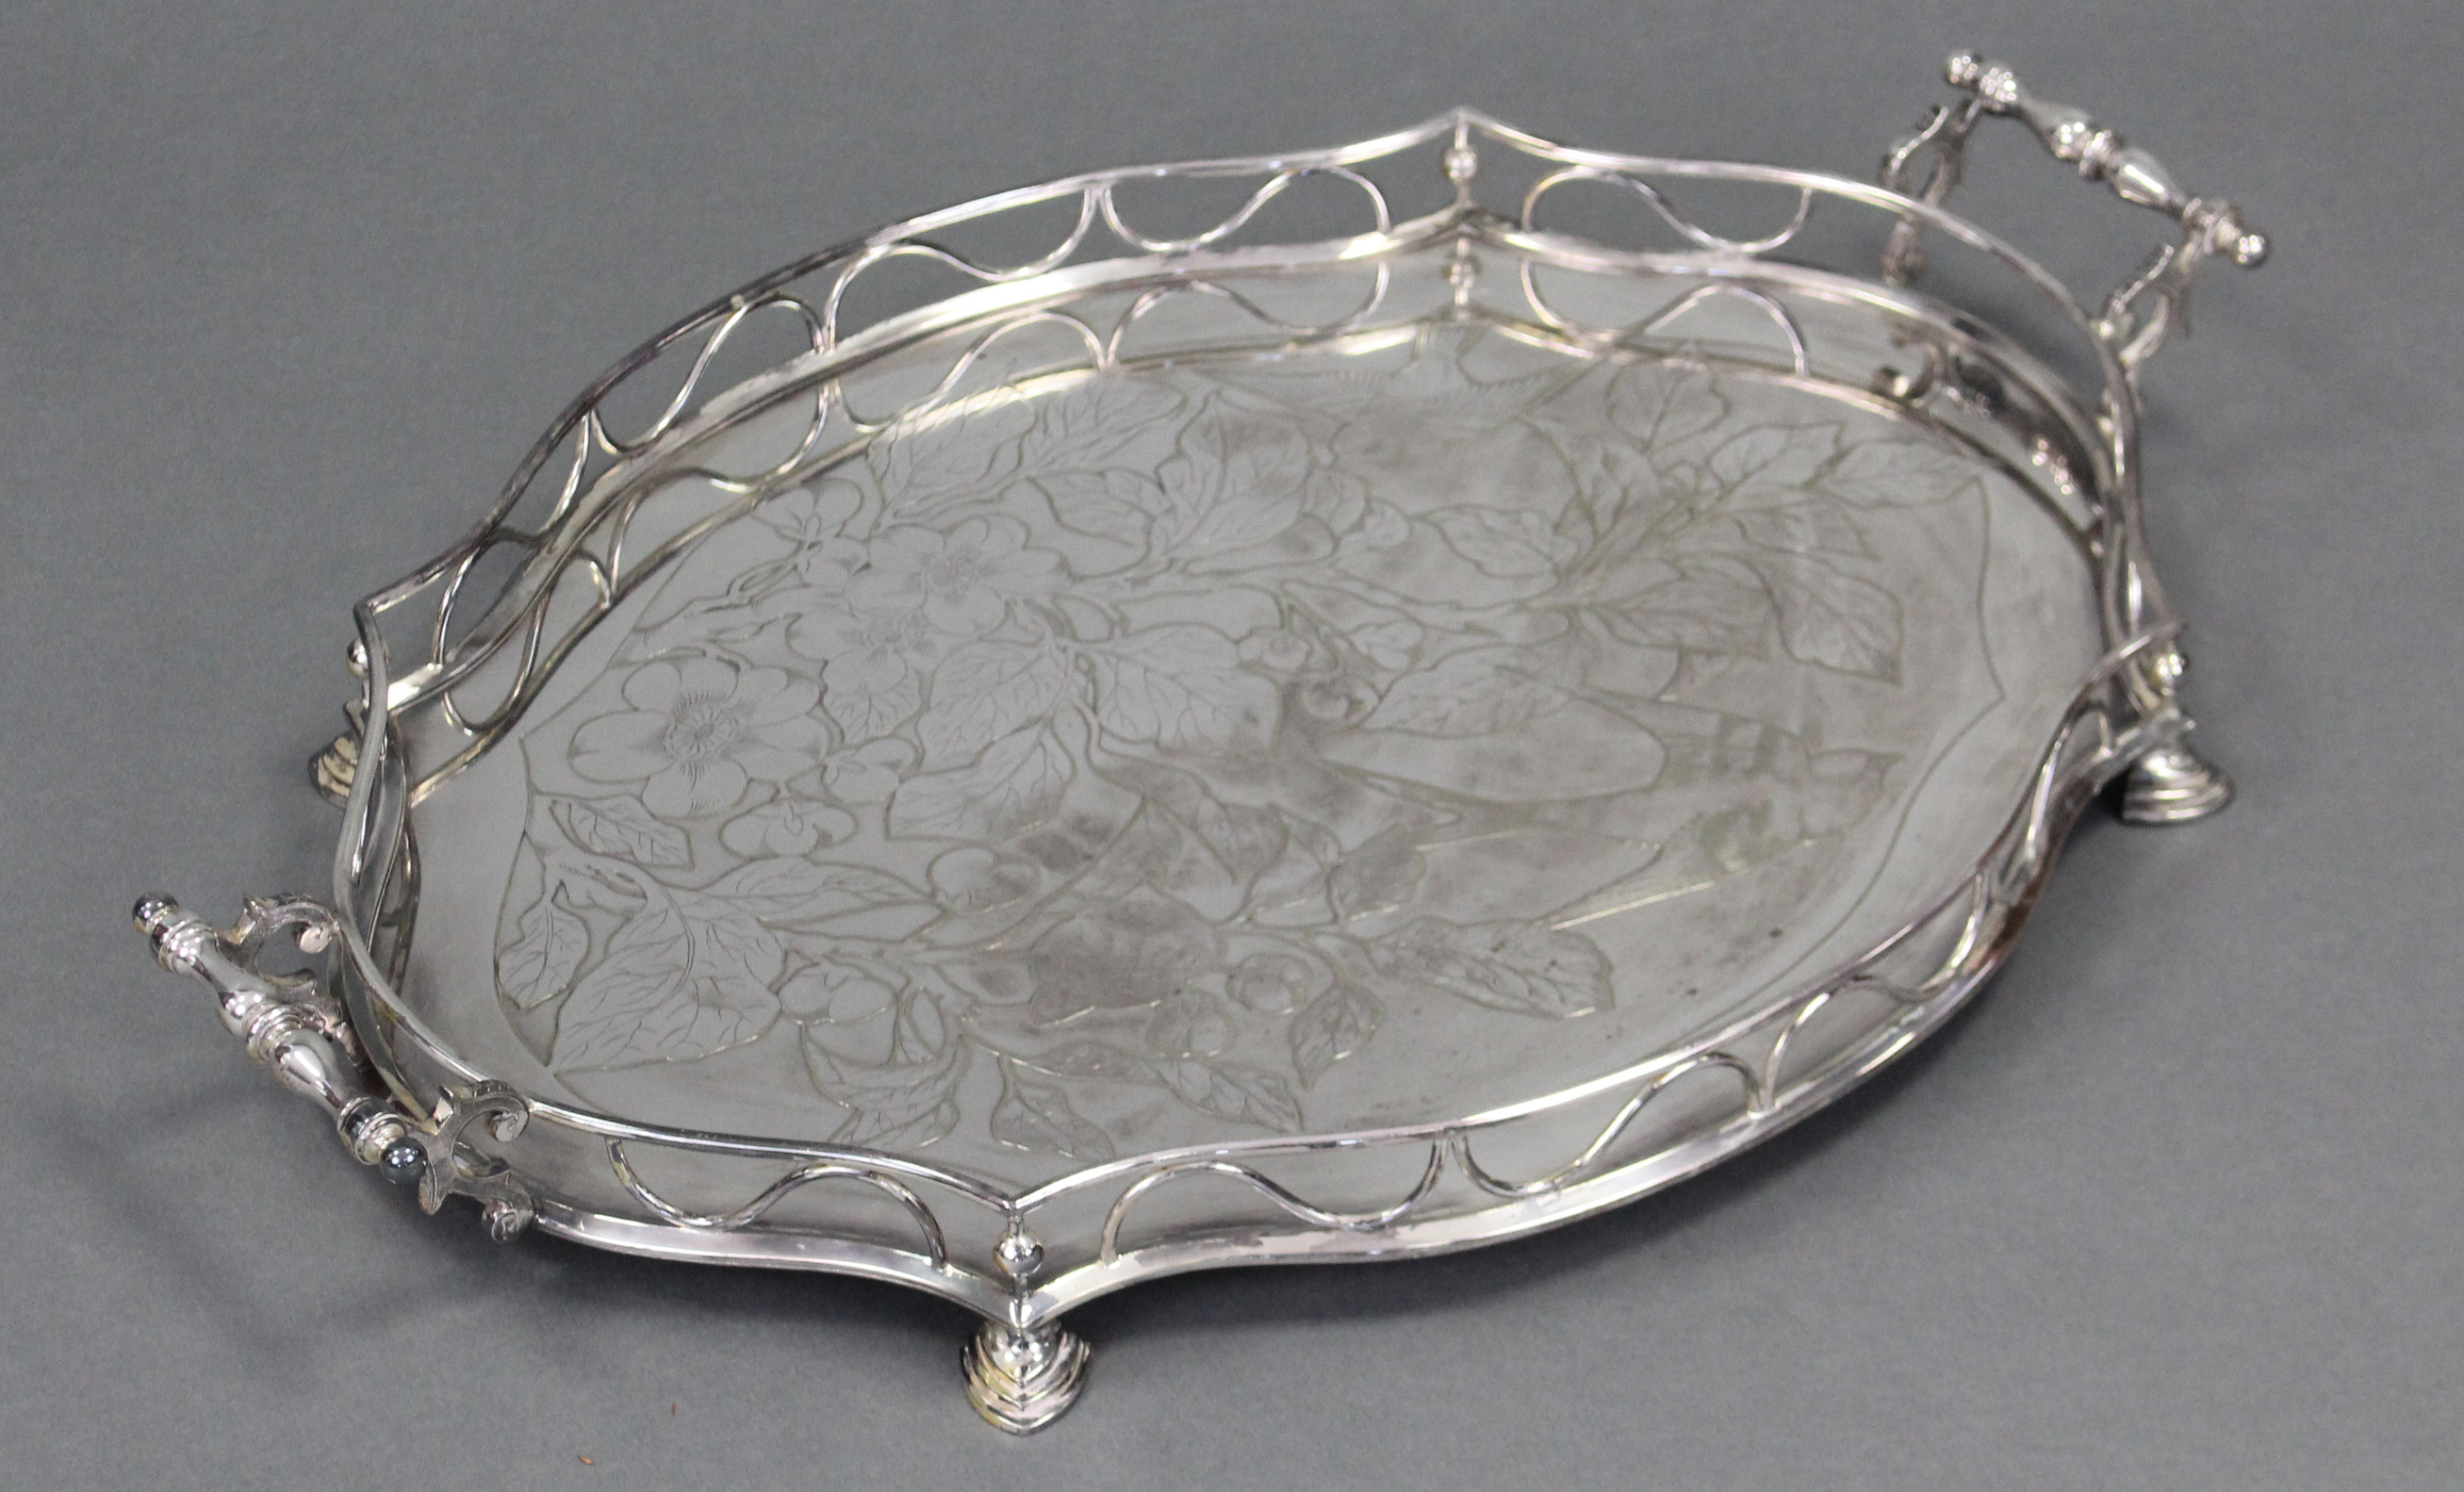 An Edwardian silver-plated shaped oval two-handled tray with embossed decoration of a bird amongst - Image 3 of 3